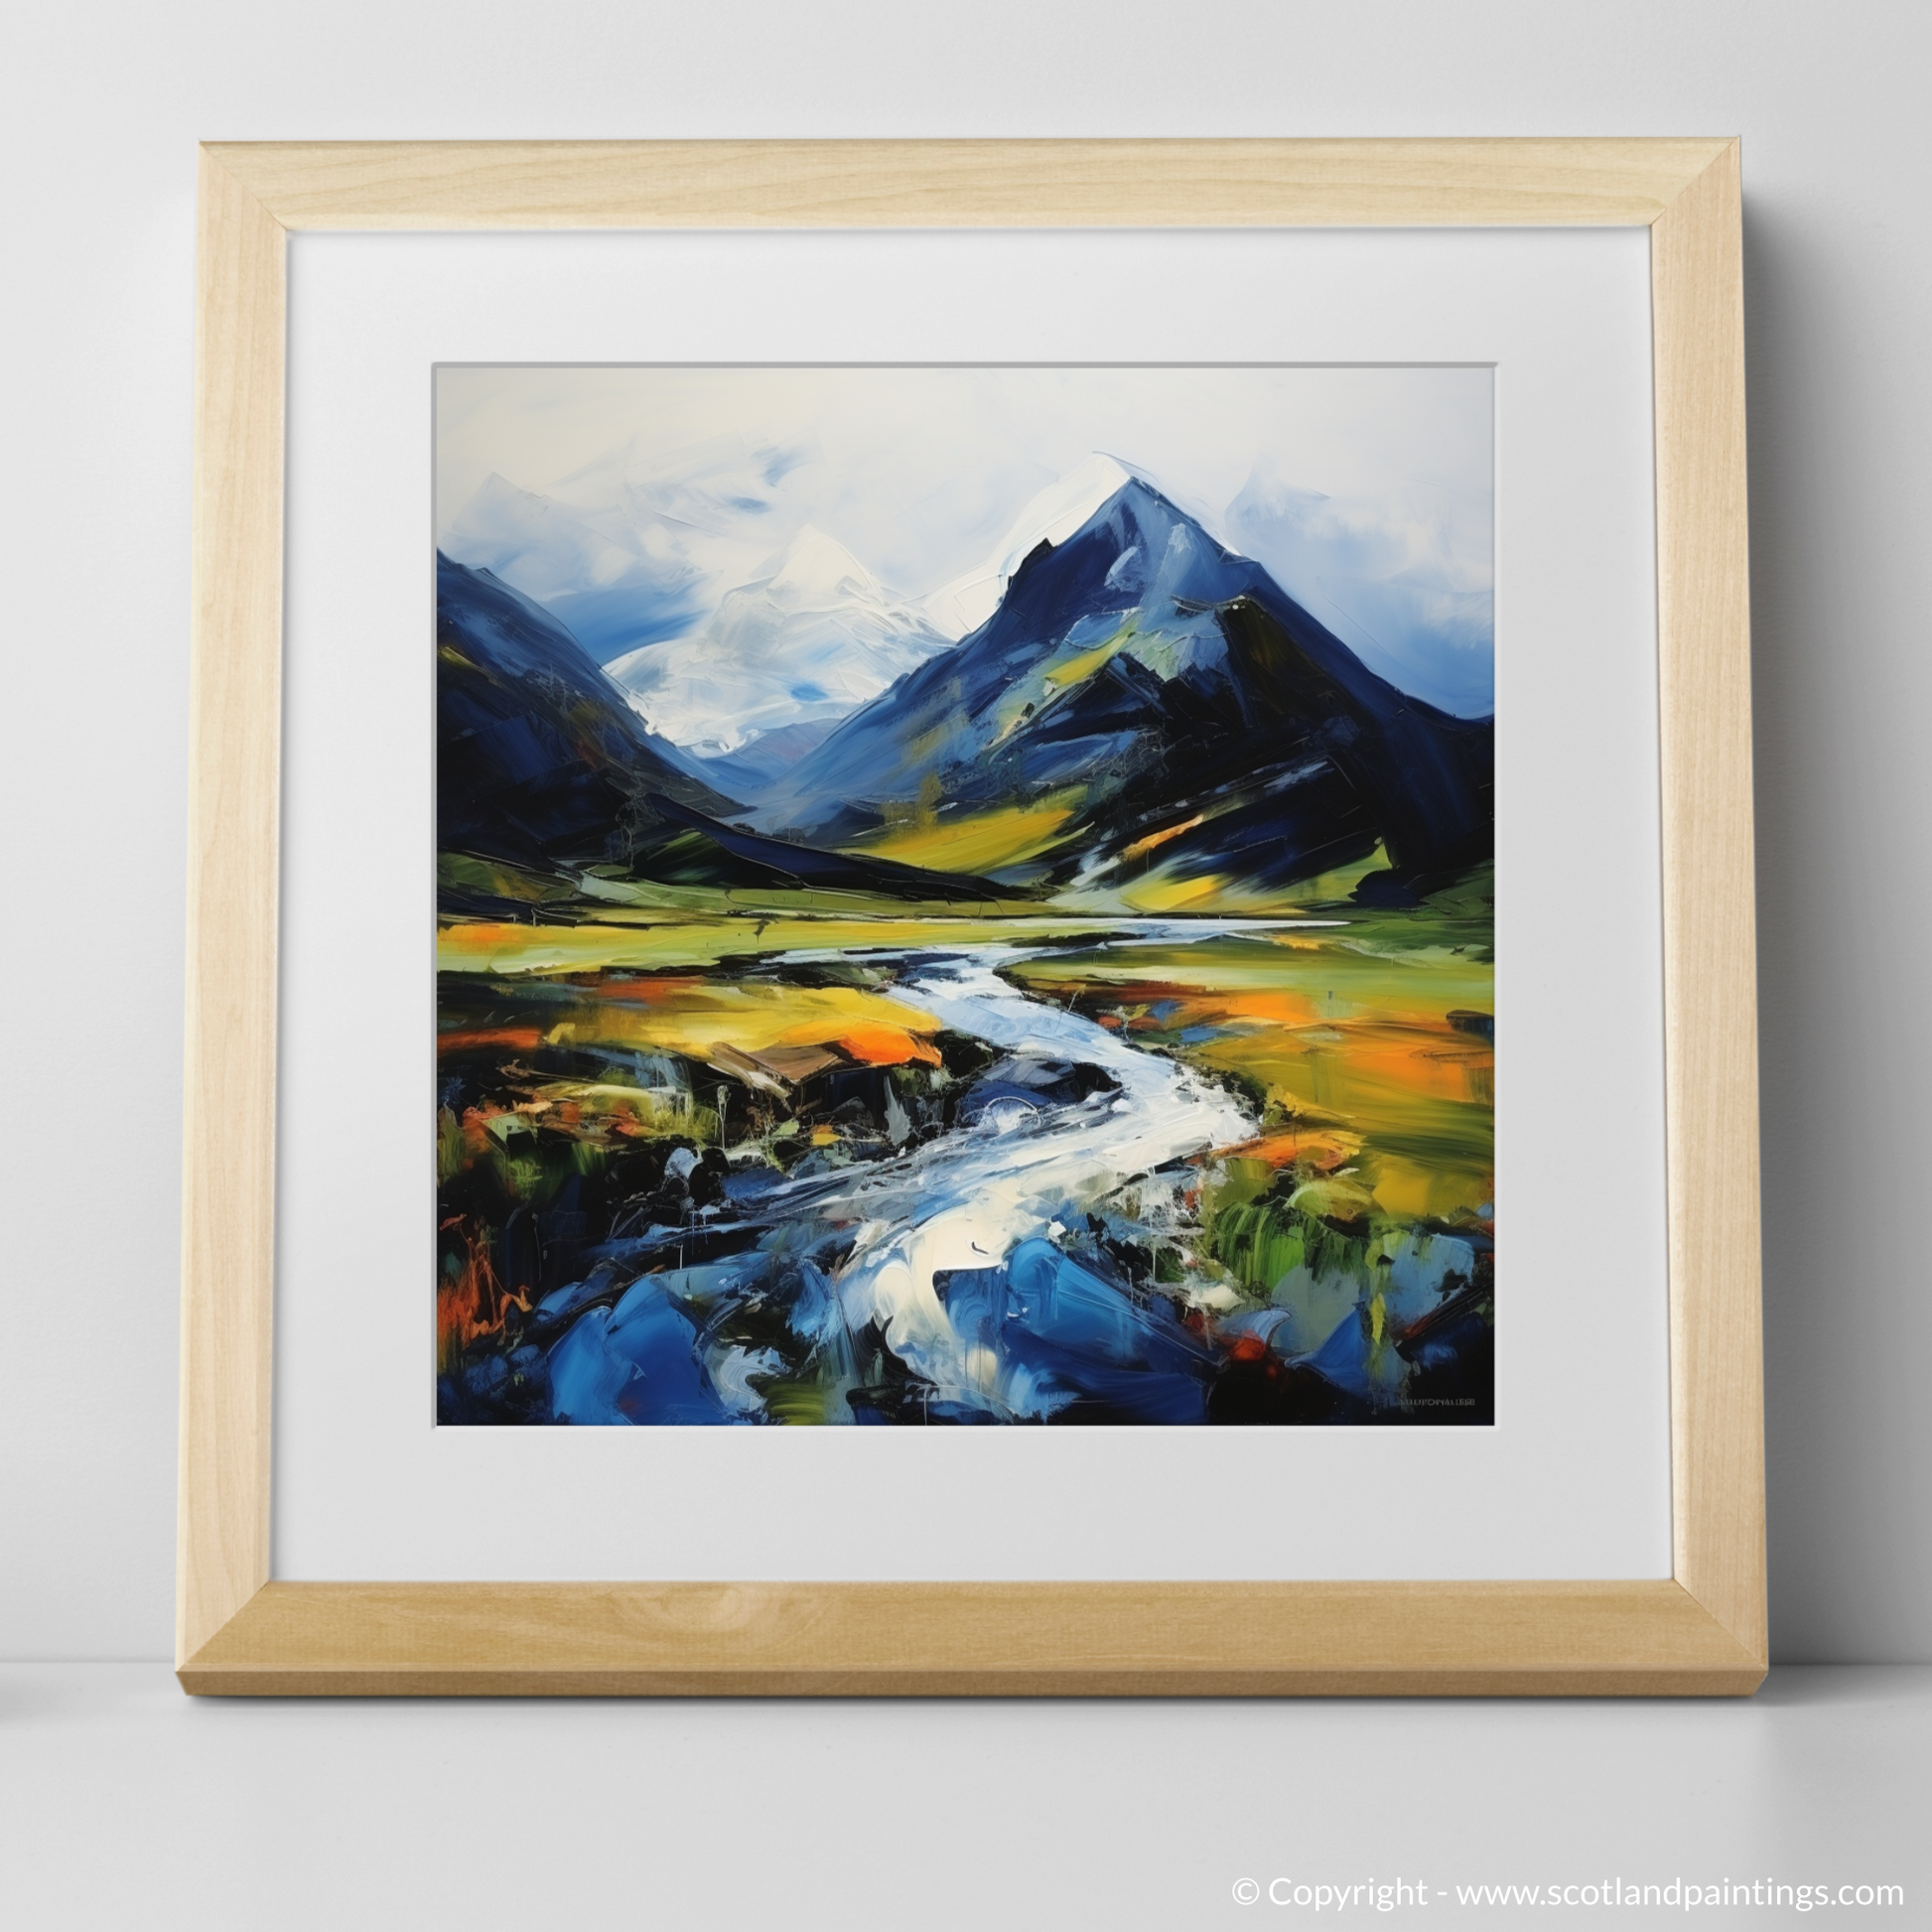 Art Print of Geal-chàrn (Drumochter) with a natural frame